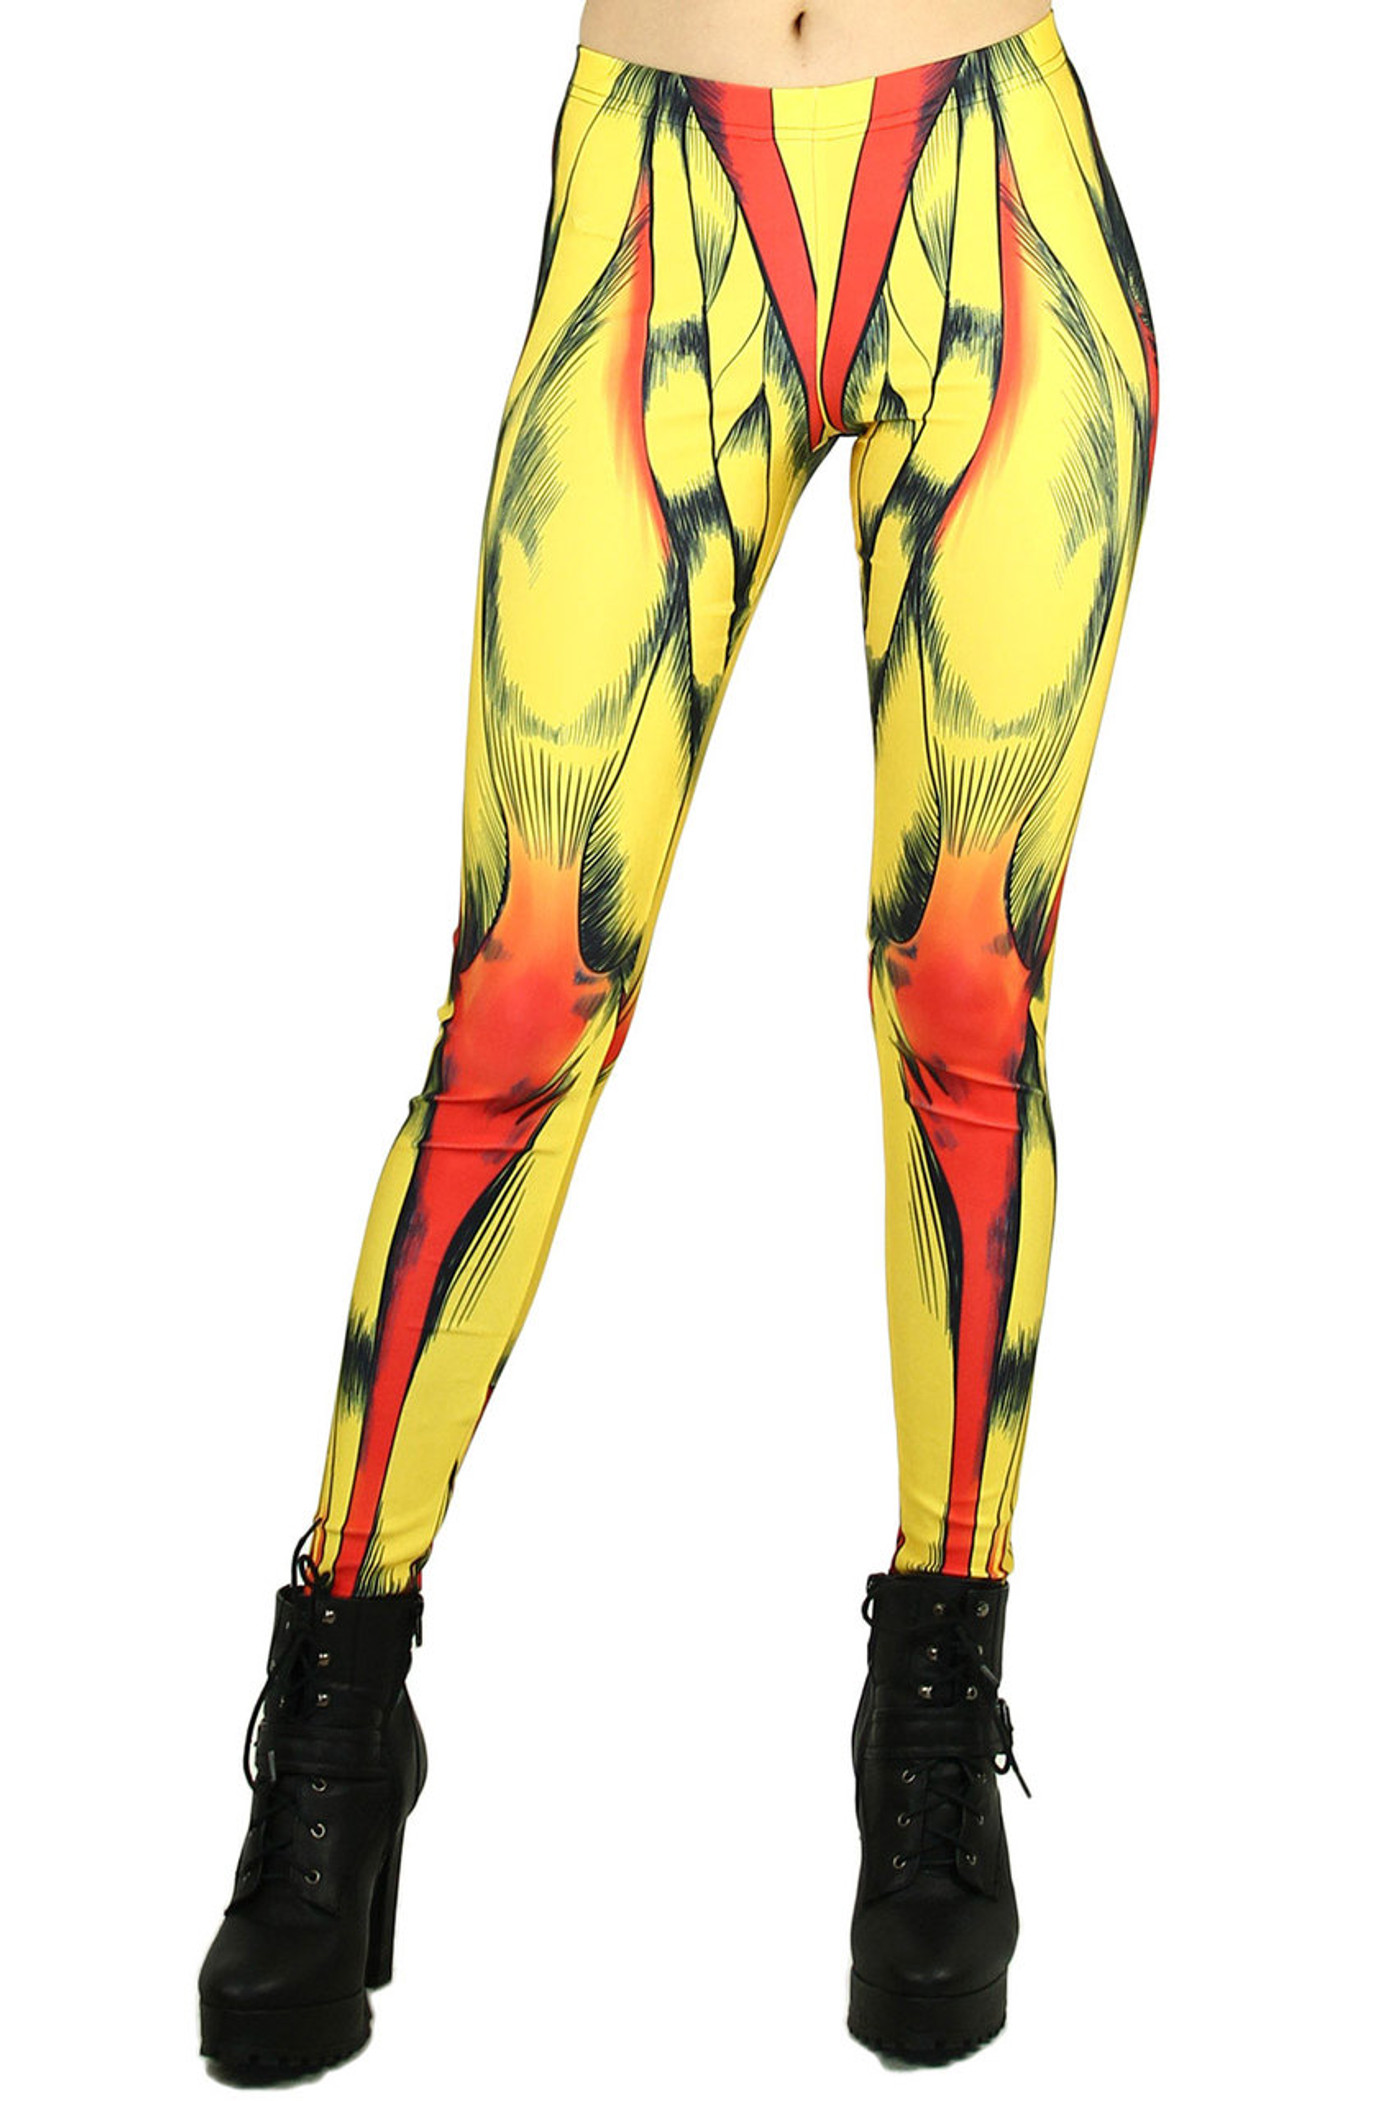 Anatomical Muscle Leggings Small To Medium